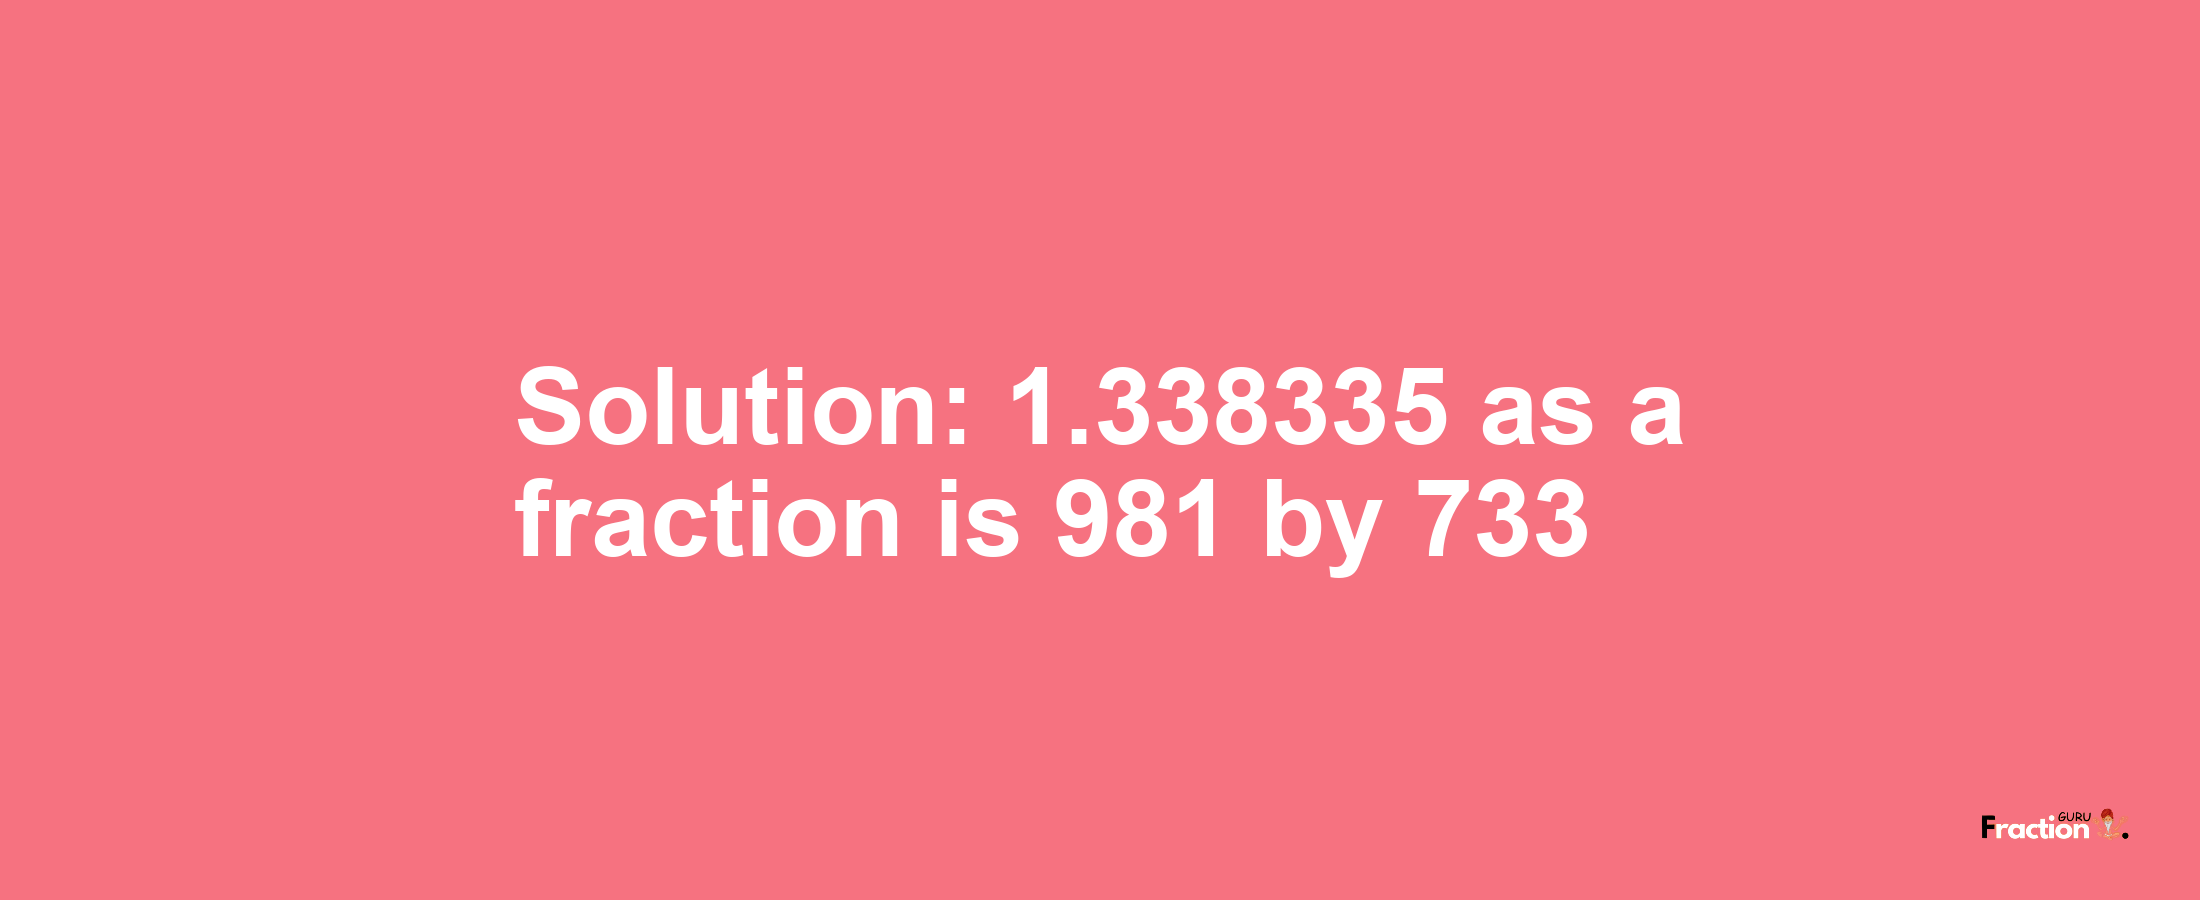 Solution:1.338335 as a fraction is 981/733